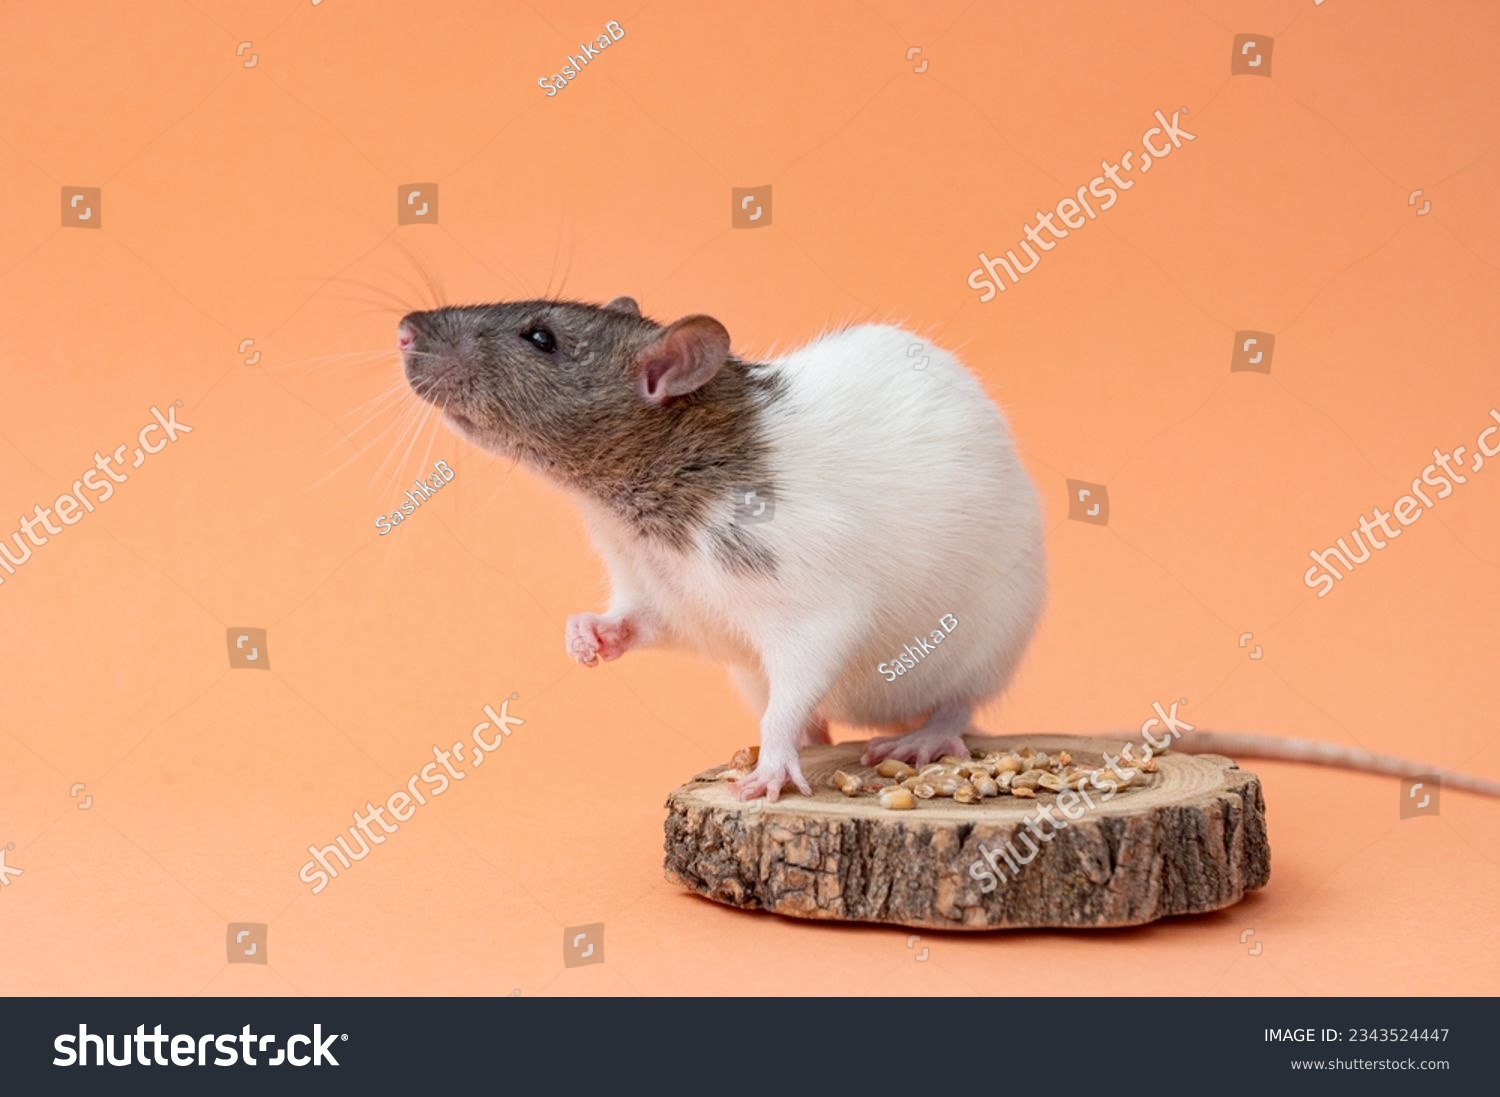 A cute pet rat is sitting on a colored background. Space for text. A pet, a rodent. The rat looks away #2343524447